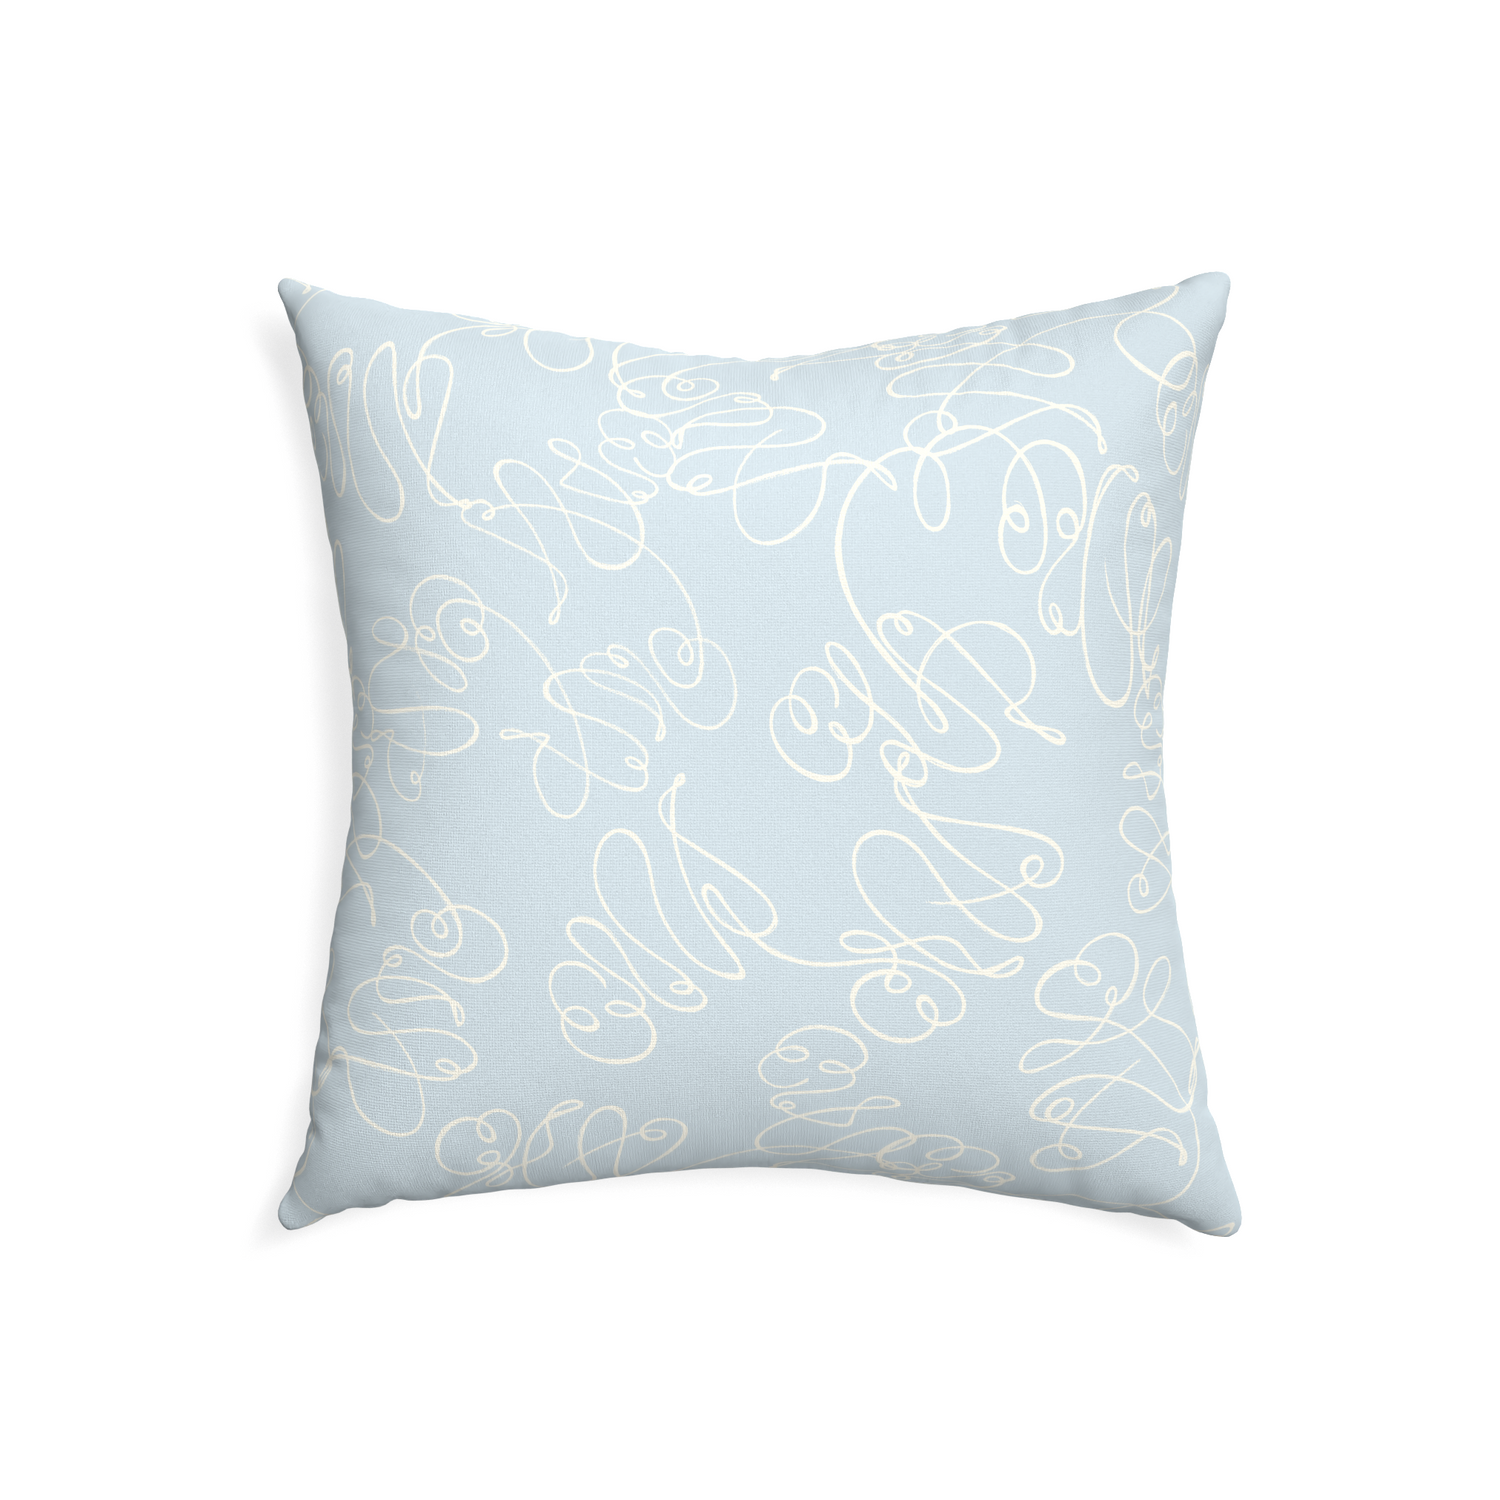 22-square mirabella custom pillow with none on white background